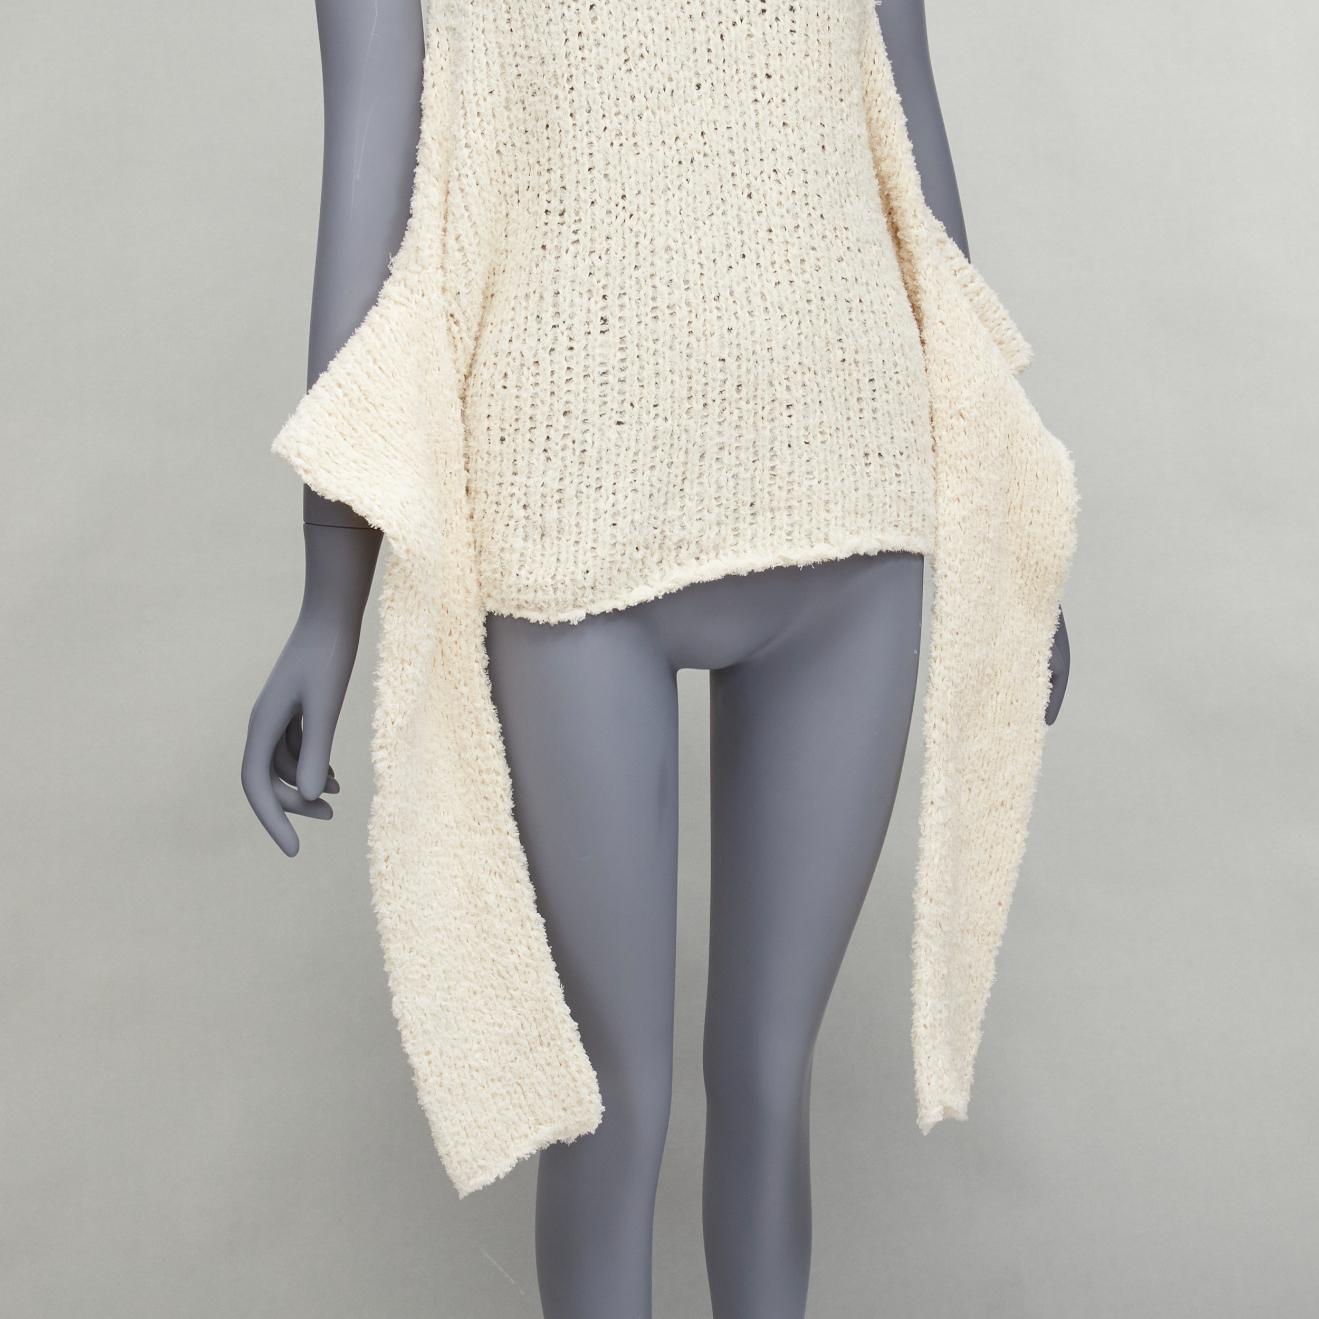 OLD CELINE Phoebe Philo cream raw cotton knit tie front sleeves sweater vest M
Reference: TGAS/D00351
Brand: Celine
Designer: Phoebe Philo
Material: Cotton
Color: Cream
Pattern: Solid
Closure: Pullover
Extra Details: Comfortable cotton knit and